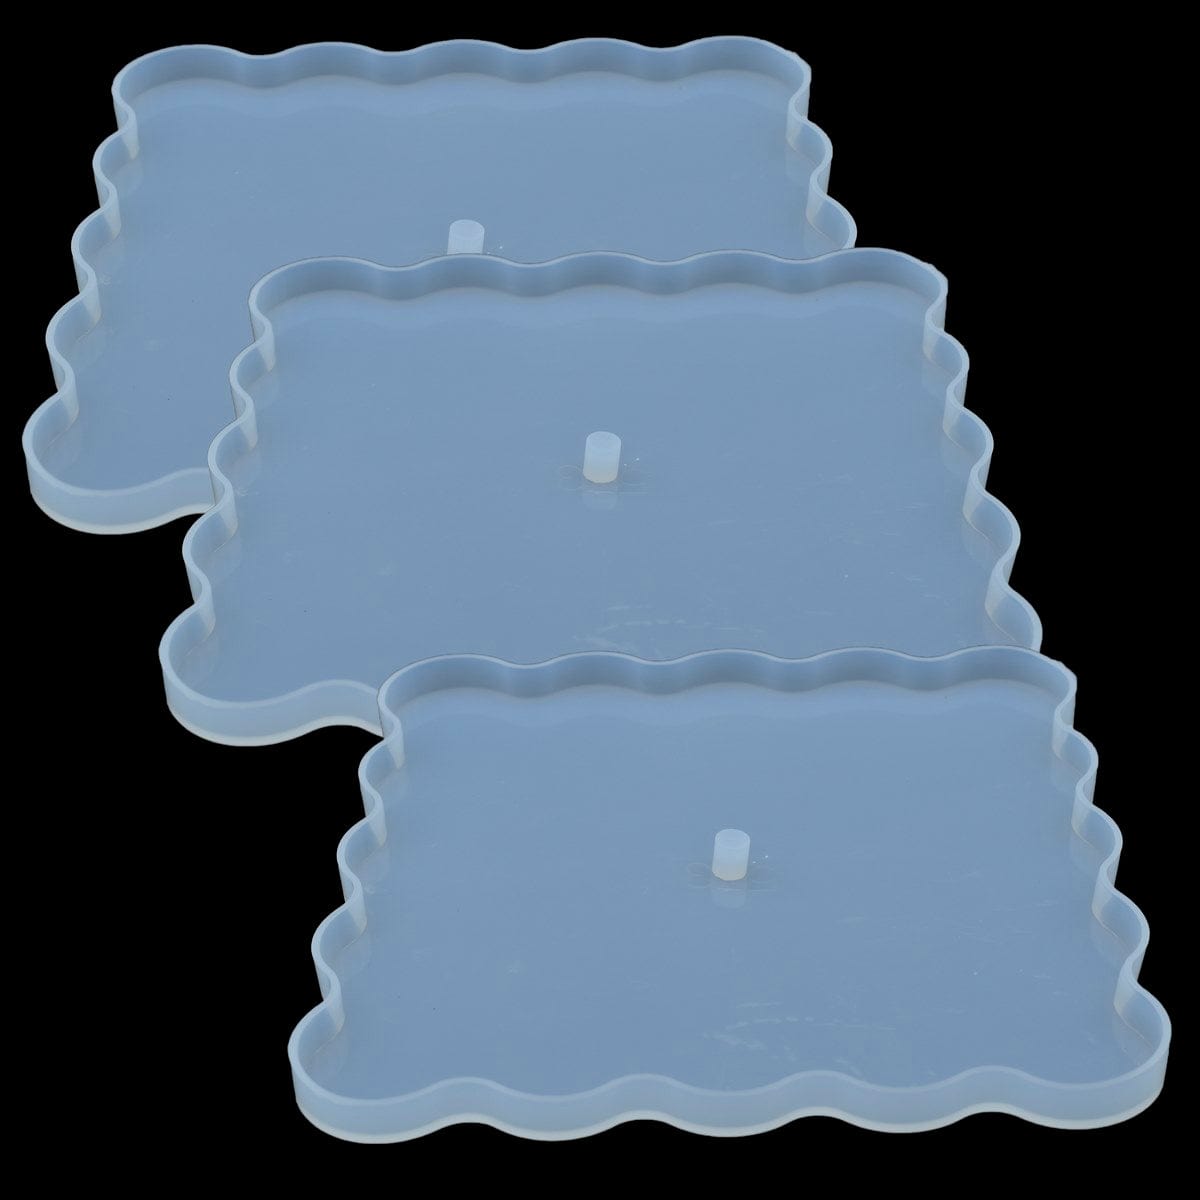 jags-mumbai Mould Silicone Mould Square Flower Design 3Pcs SMSF00